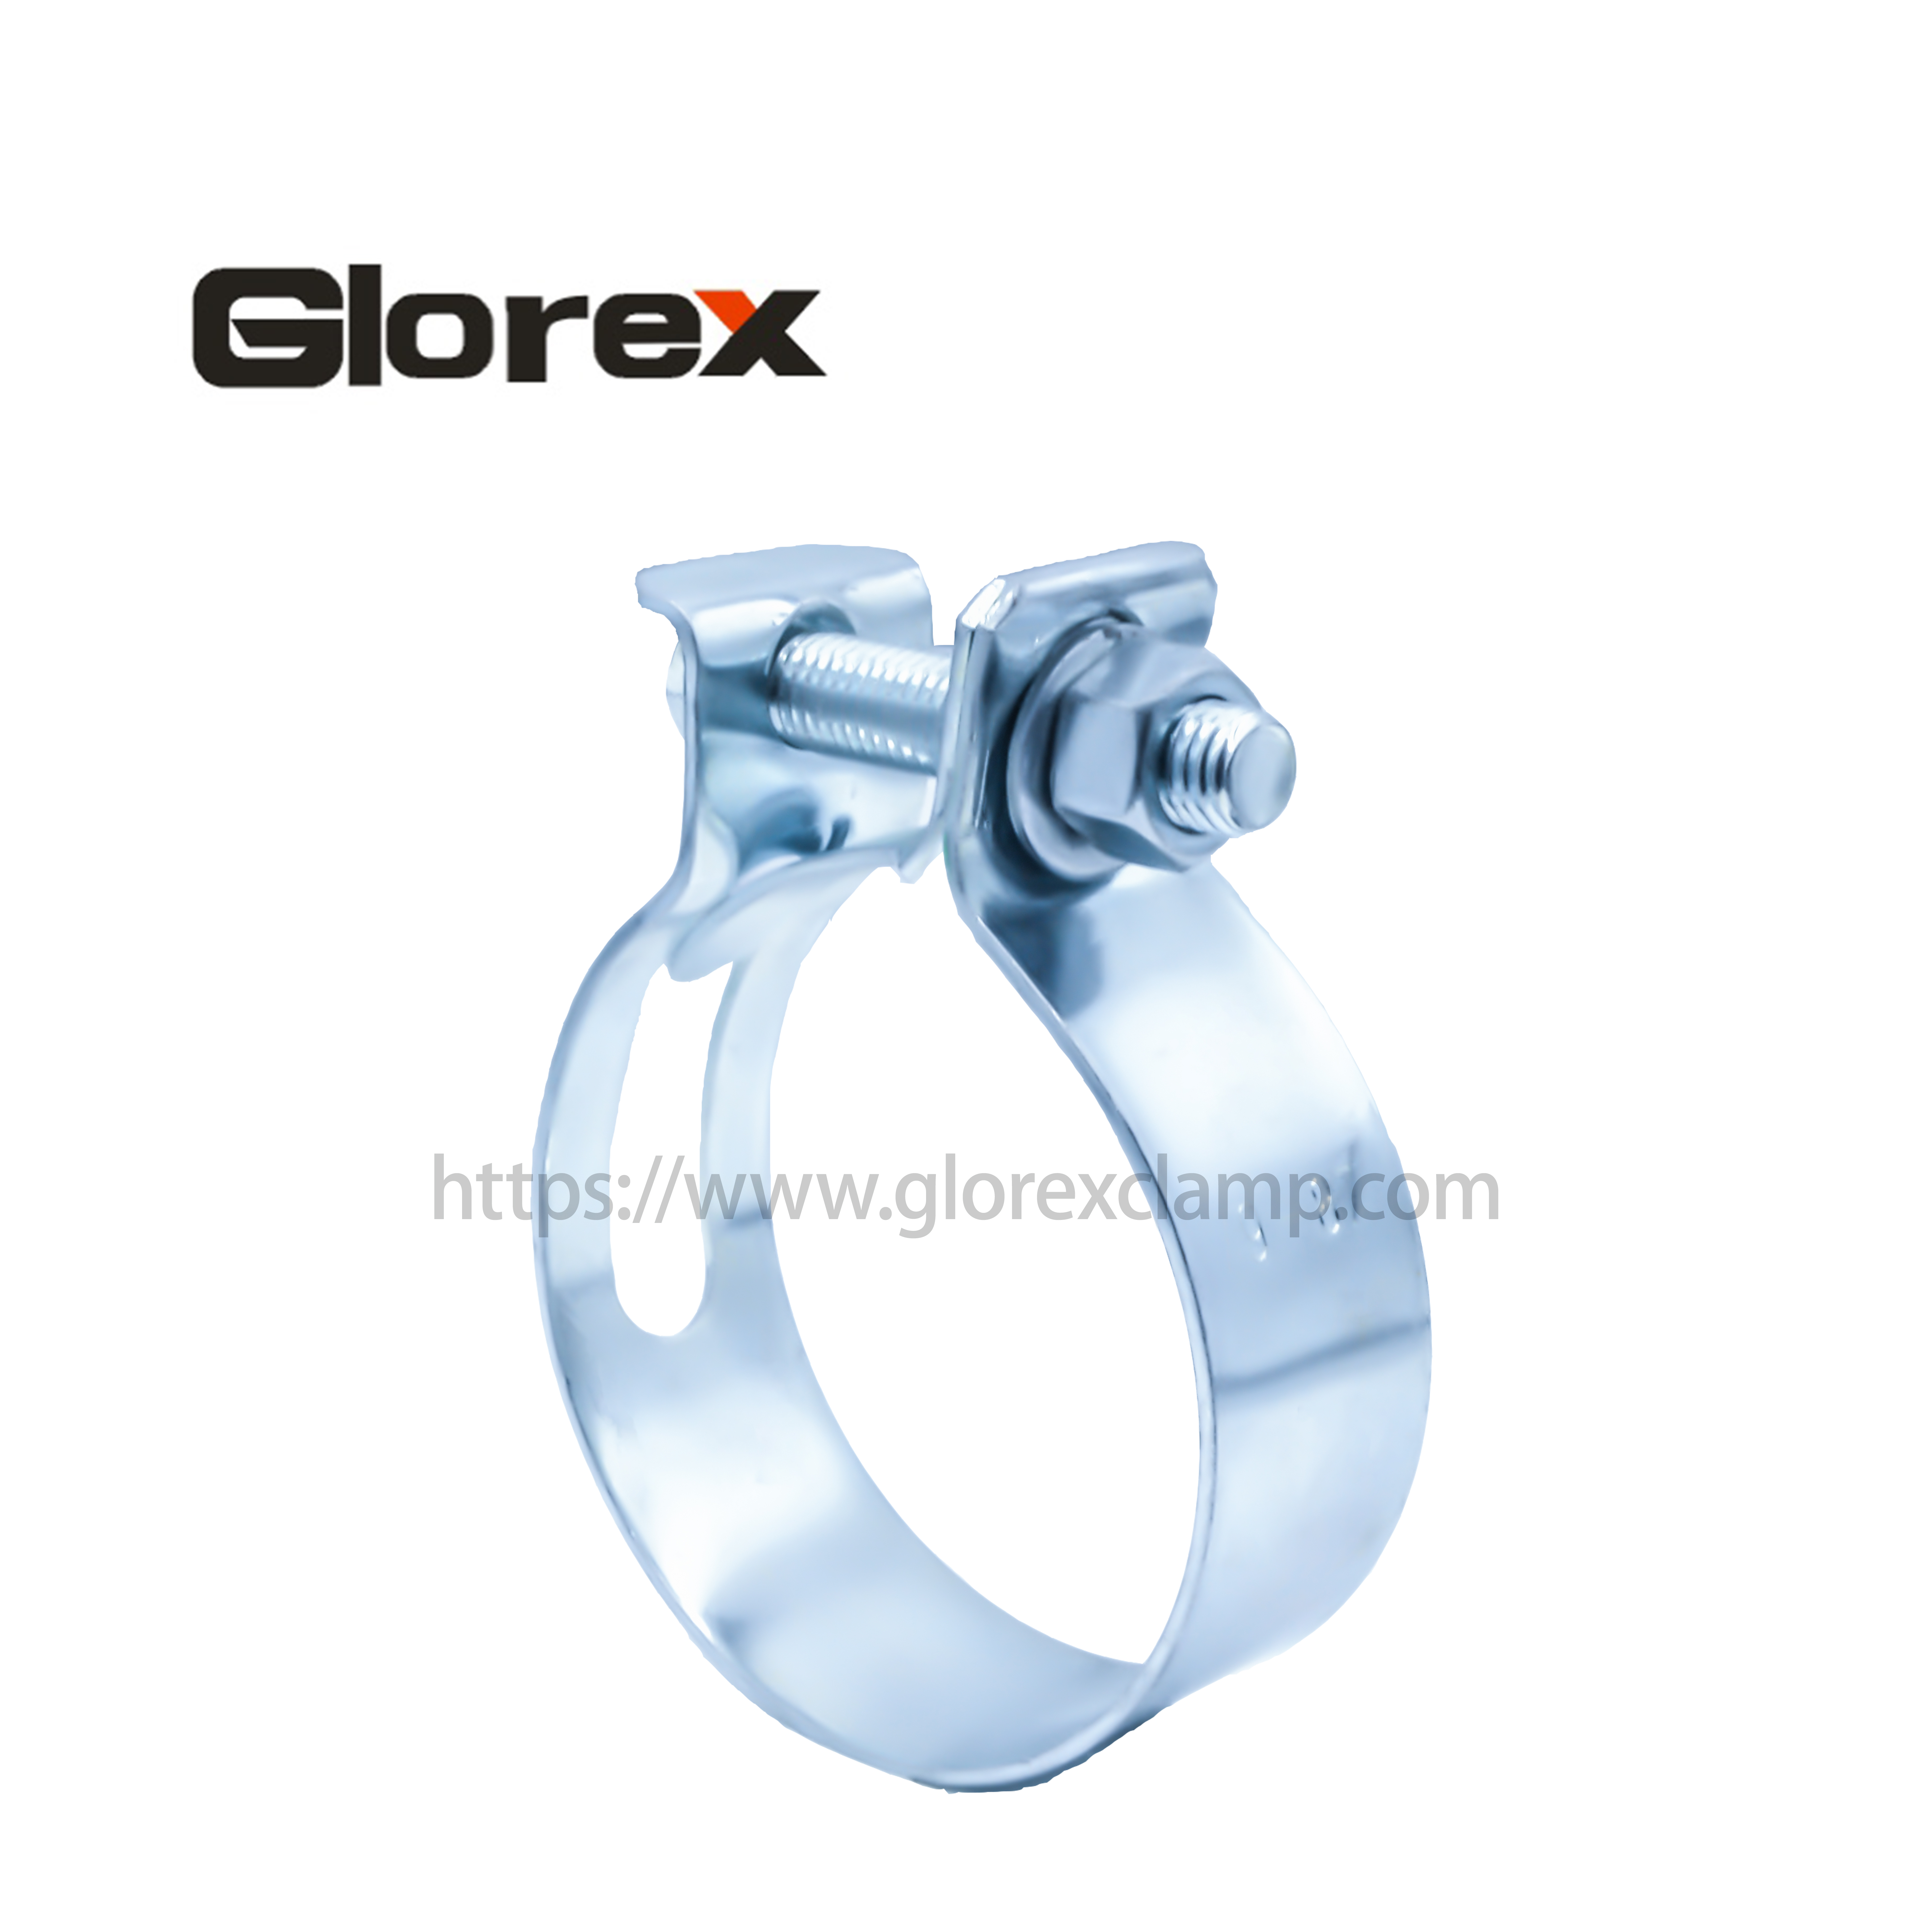 Popular Design for Stamping Parts - The bay-type clamp – Glorex